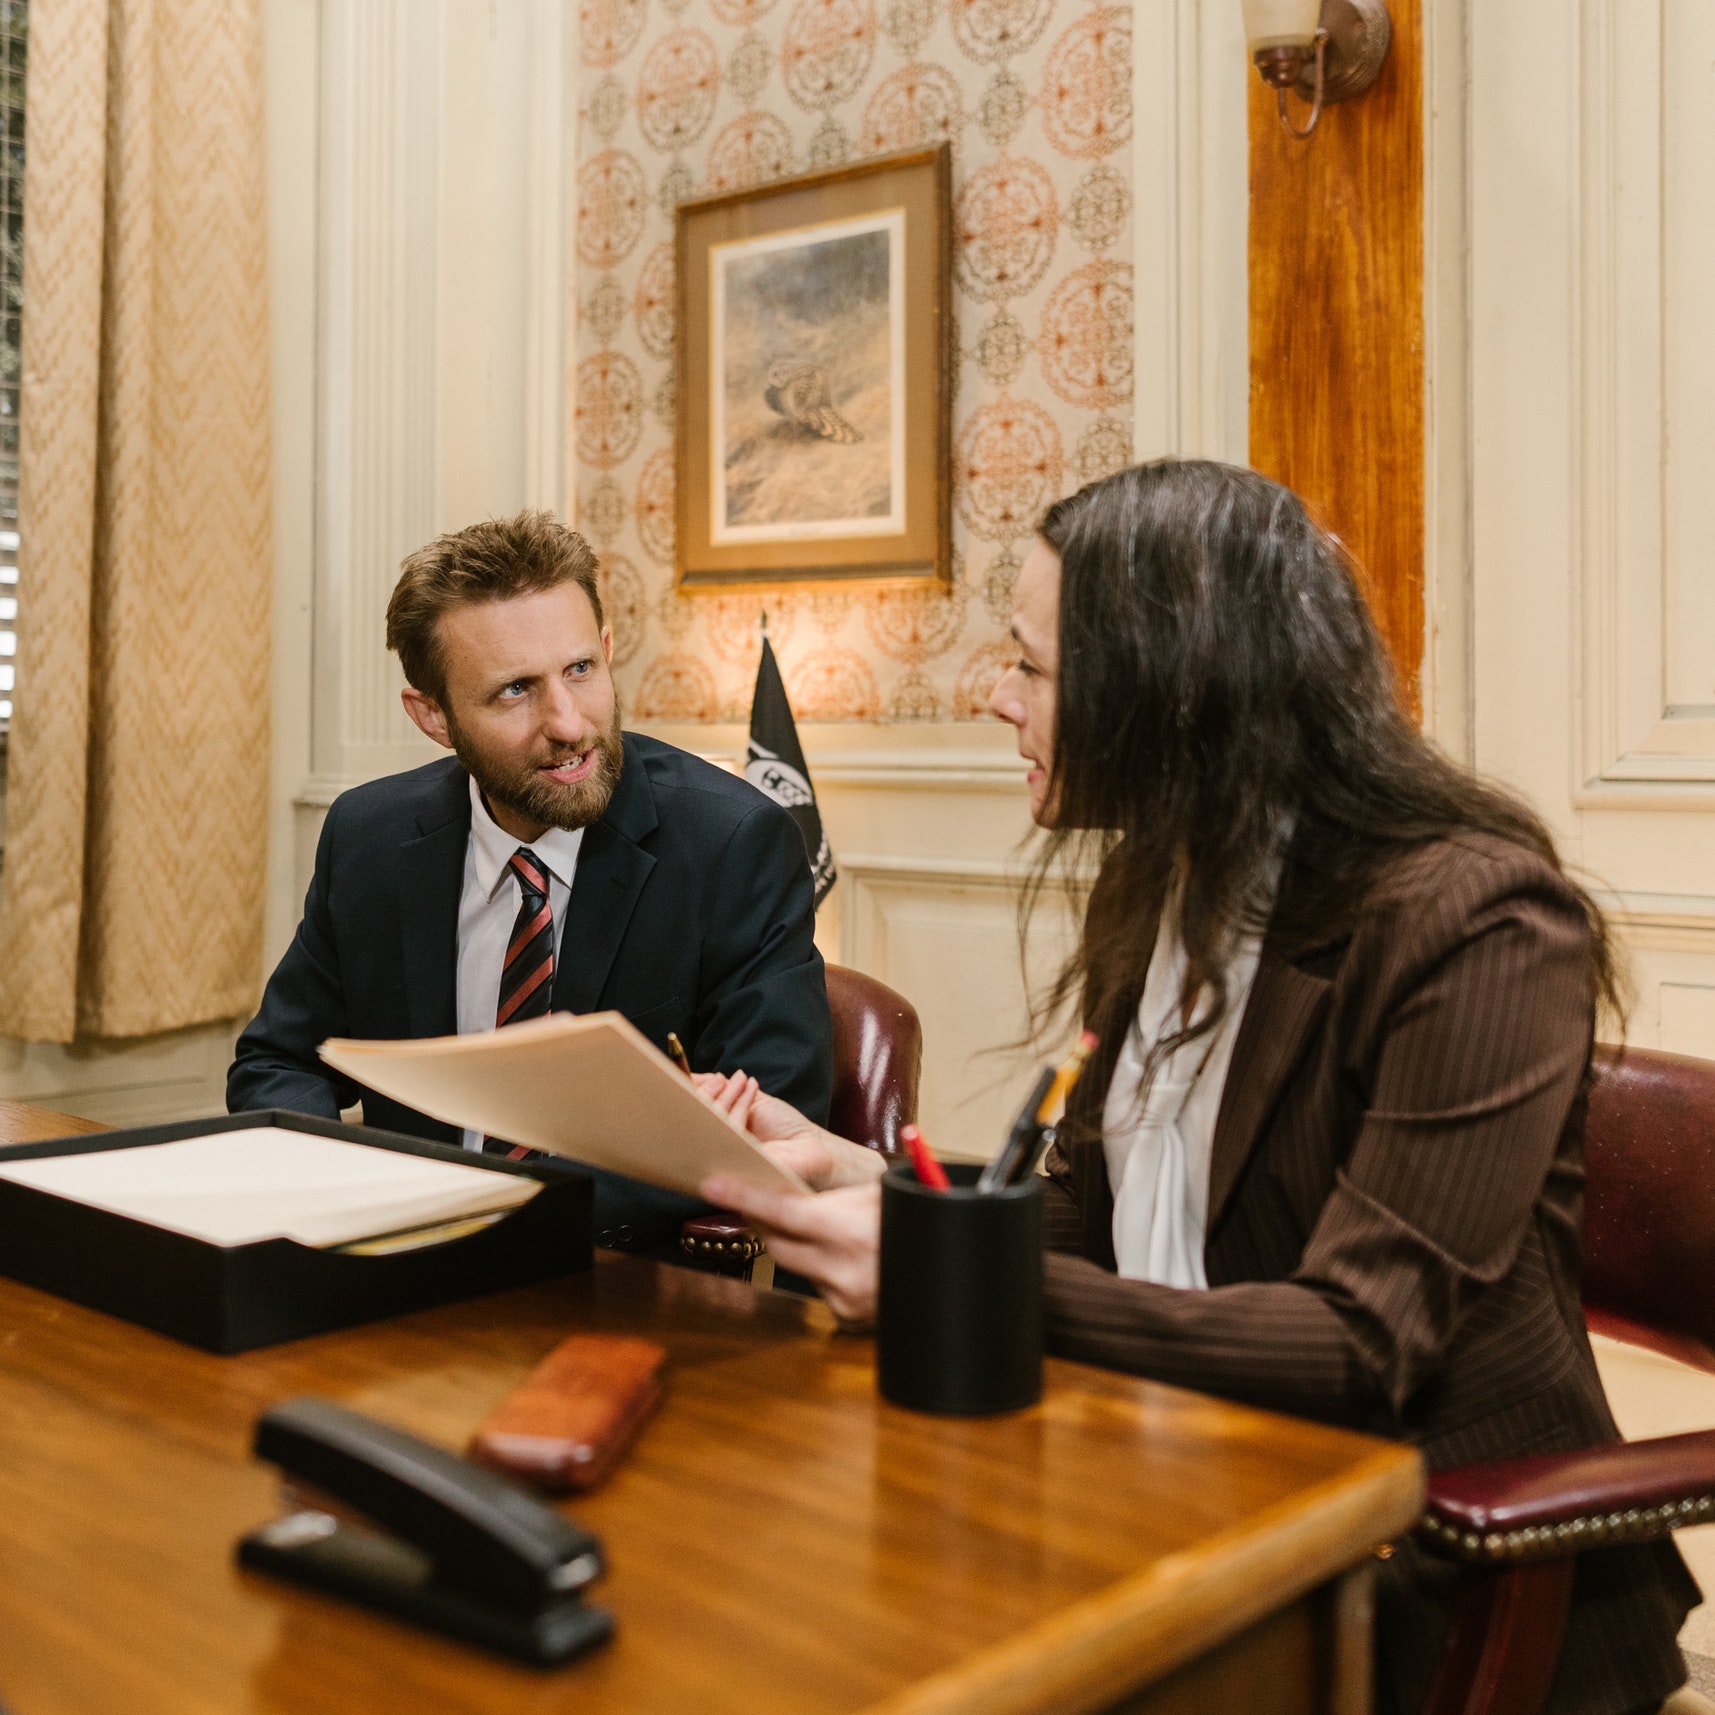 A man and woman have a discussion at a law office desk